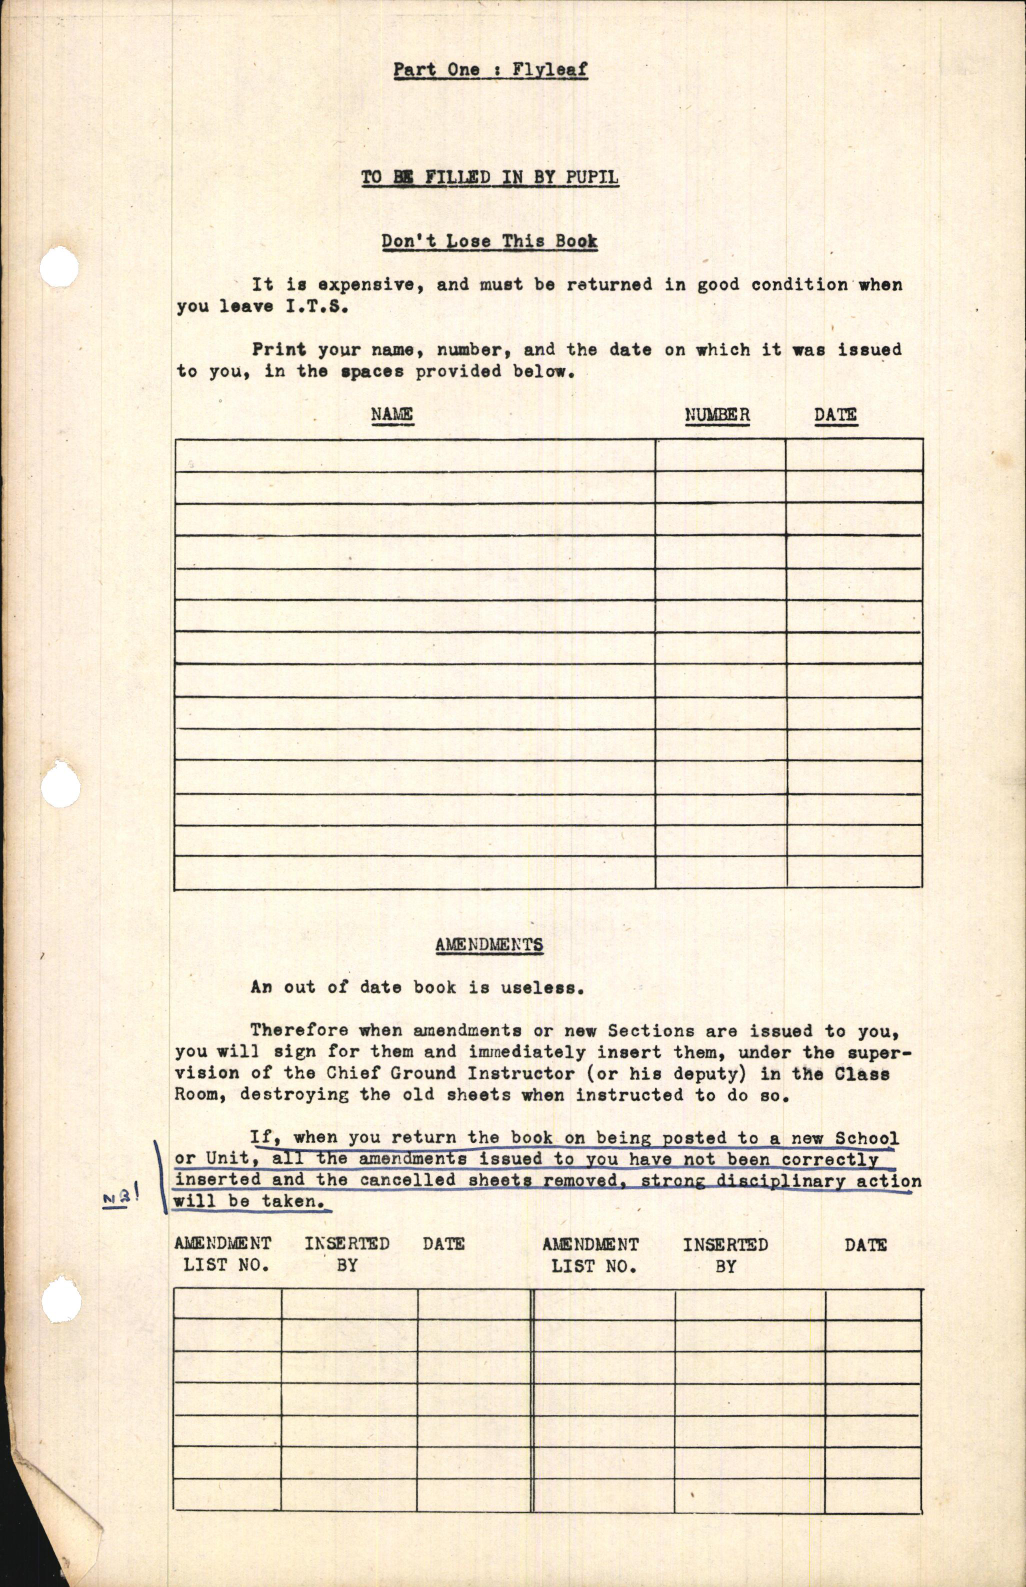 Sample page 7 from AirCorps Library document: The Service Aircrew Part One